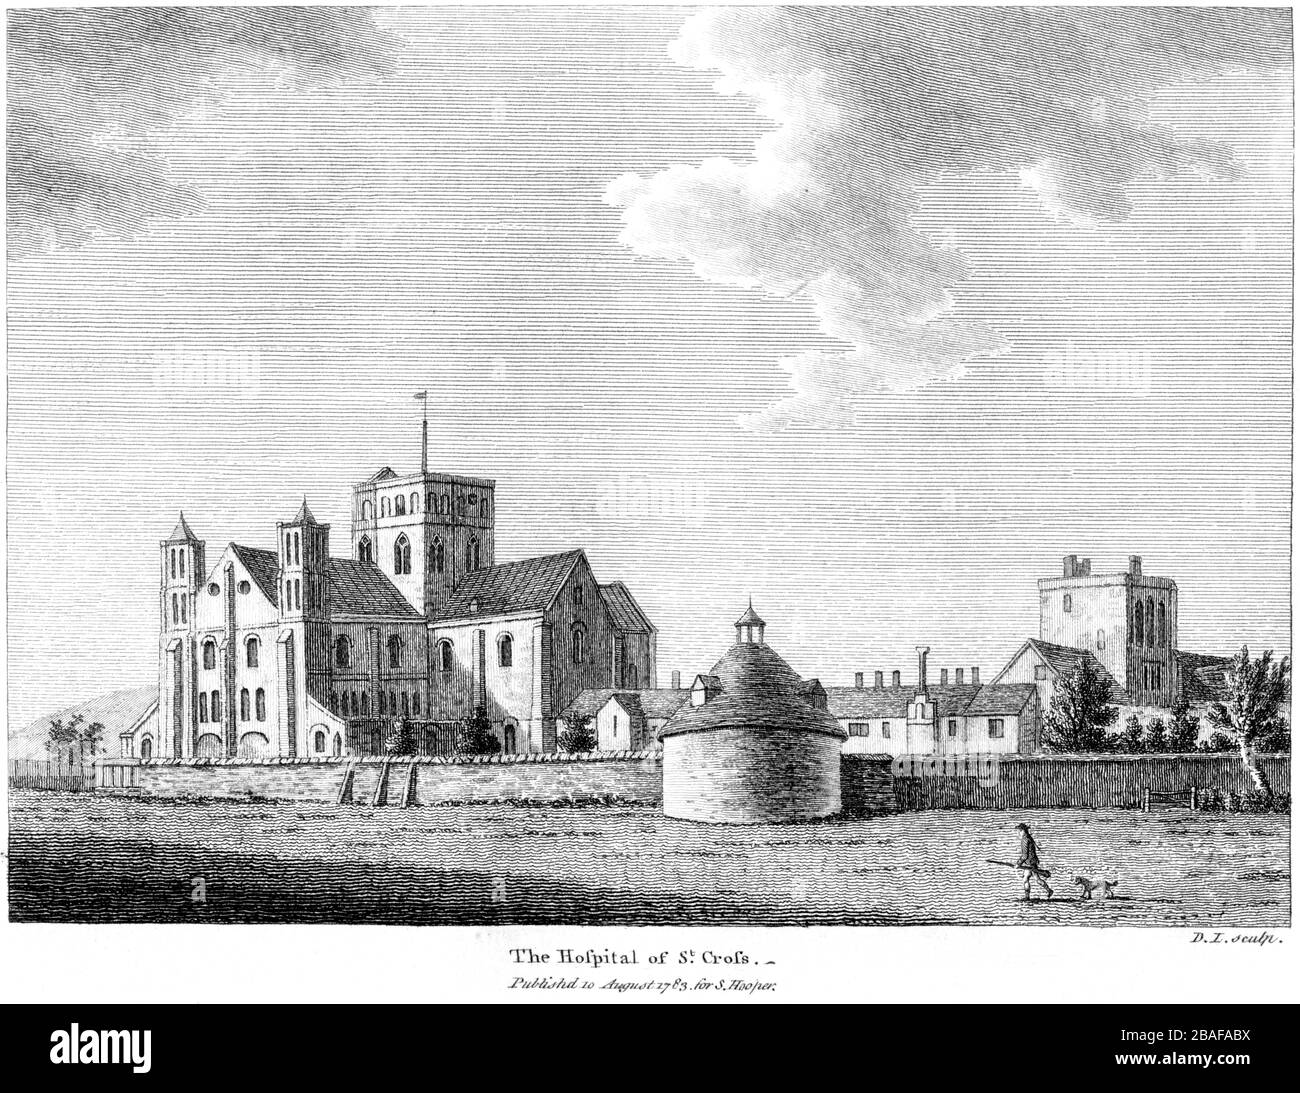 An engraving of The Hospital of St Cross 1783 (Winchester) scanned at high resolution from a book published around 1786. Believed copyright free. Stock Photo